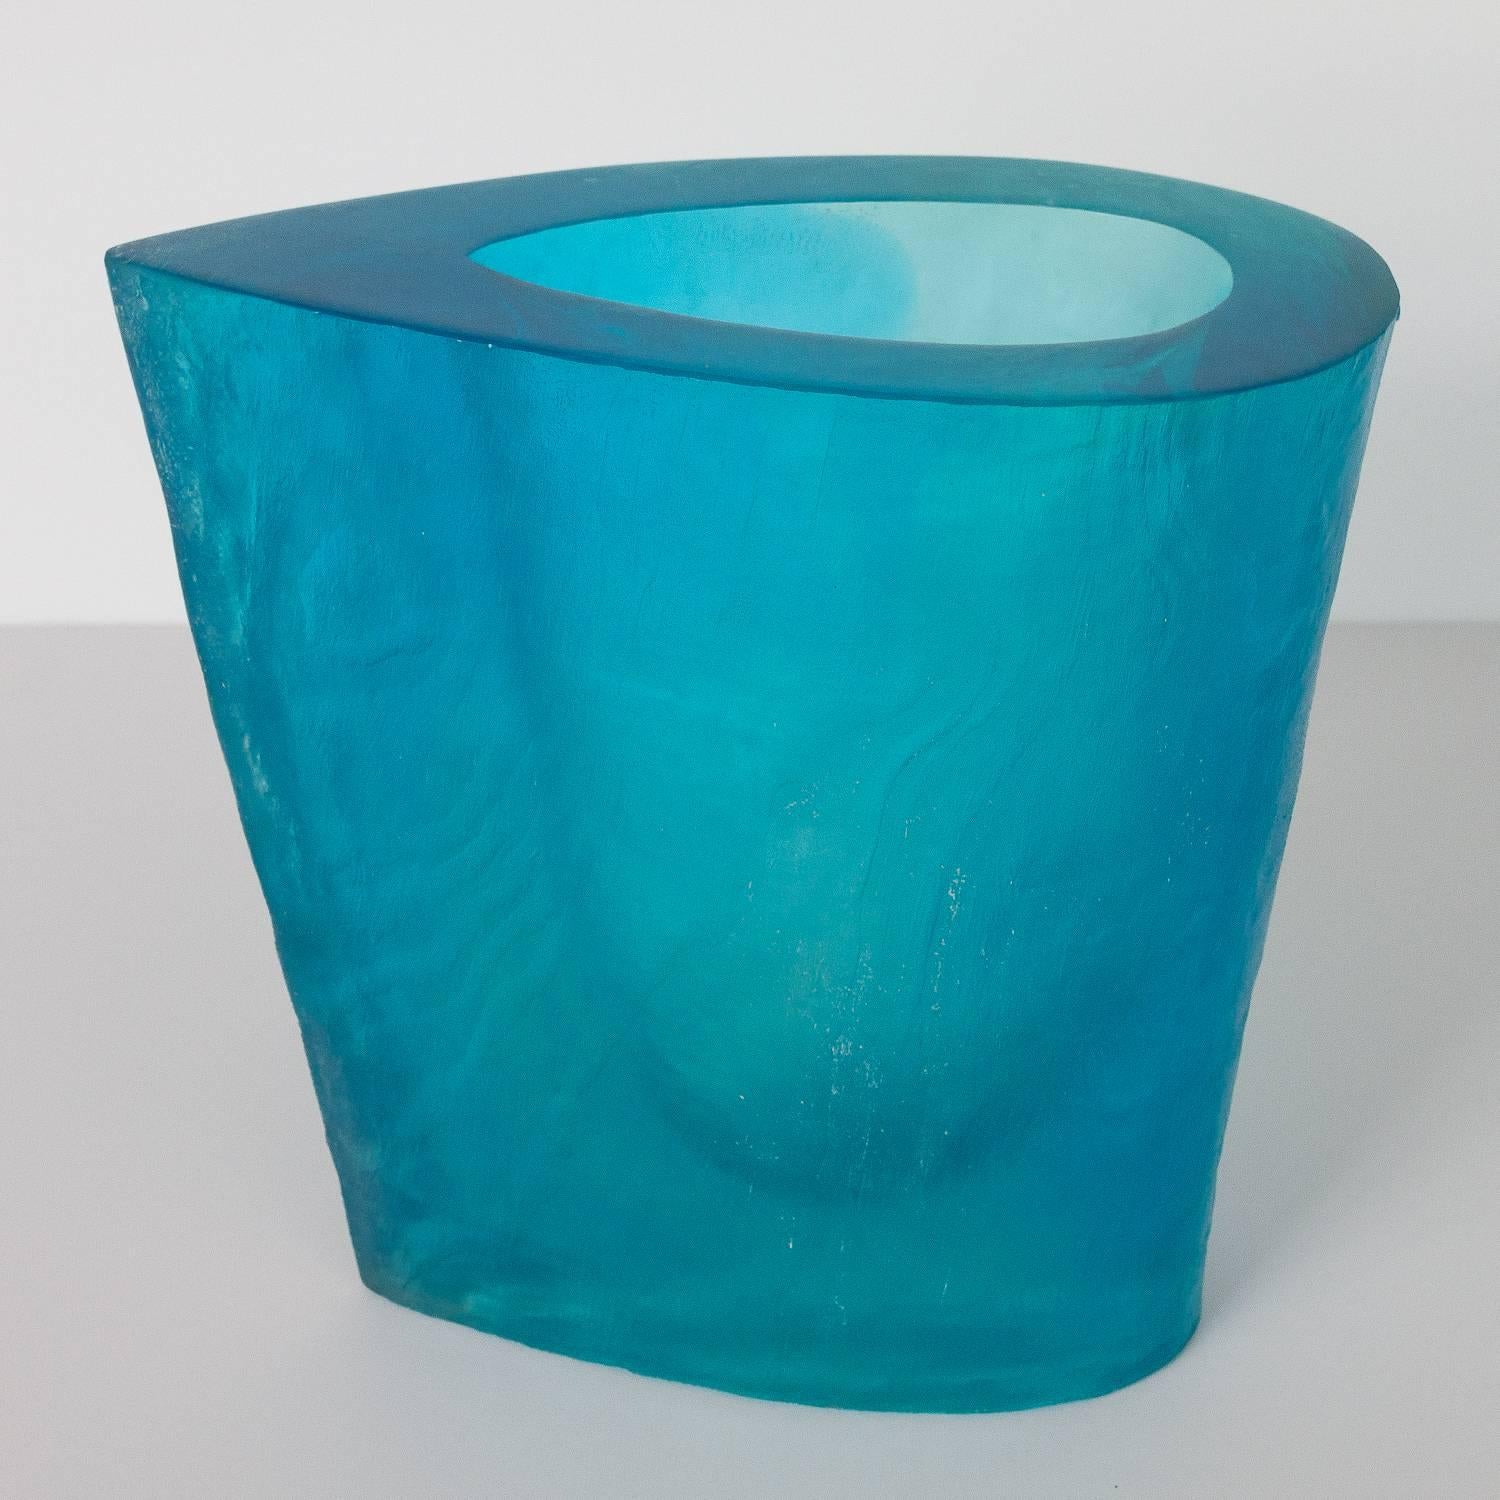 Aqua blue polymer resin optical sculpture vase by Terry Balle. Textured exterior and interior with a polished rim surface. The texture has a subtle faux bois ripple pattern and 